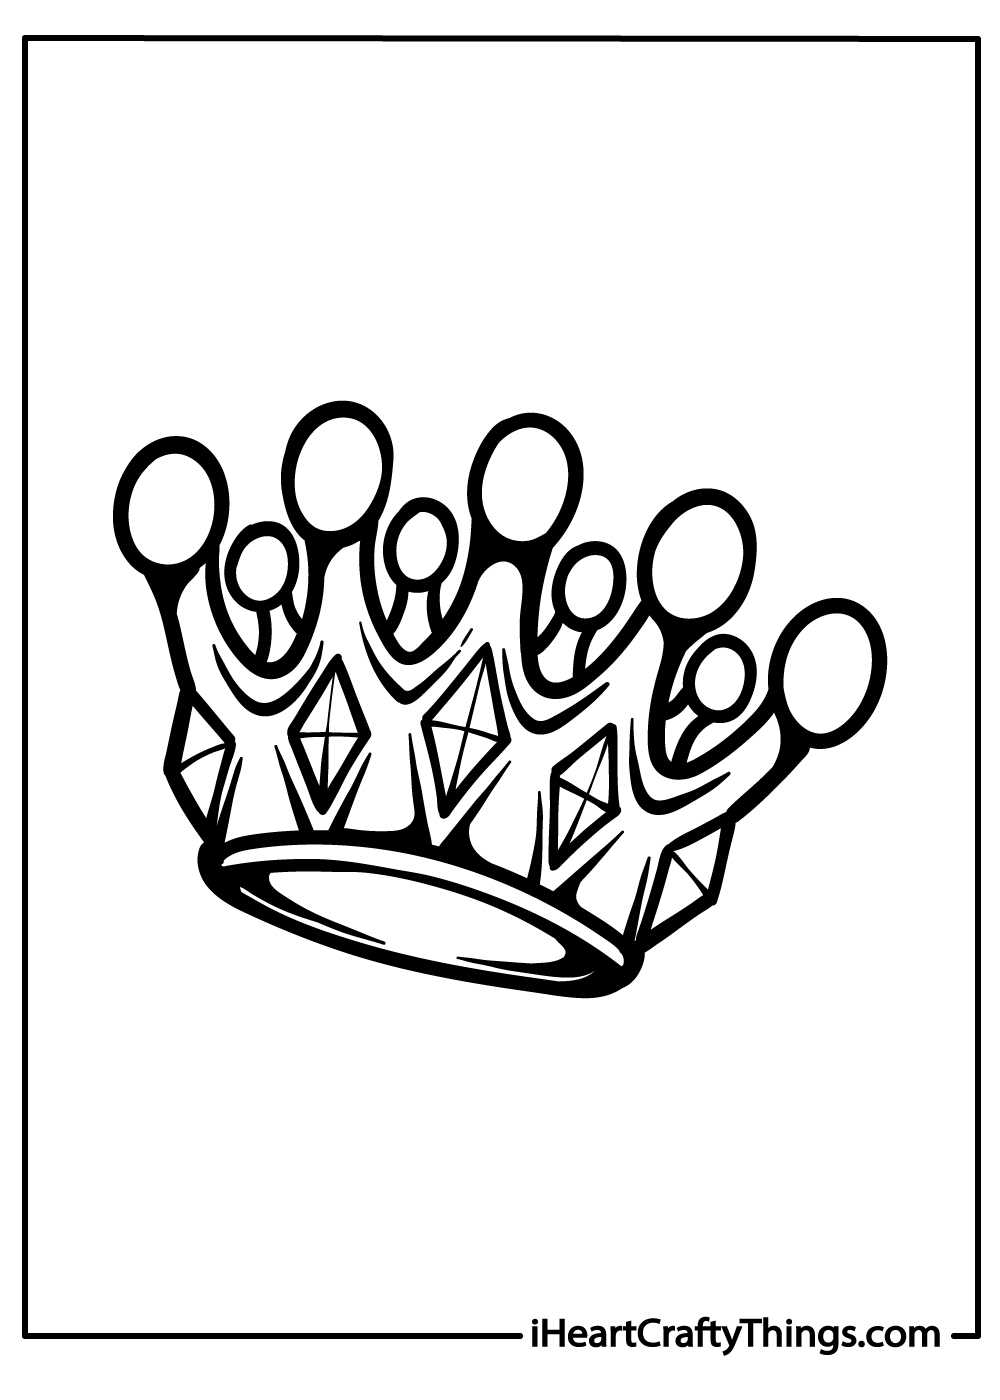 new crown coloring pages free download